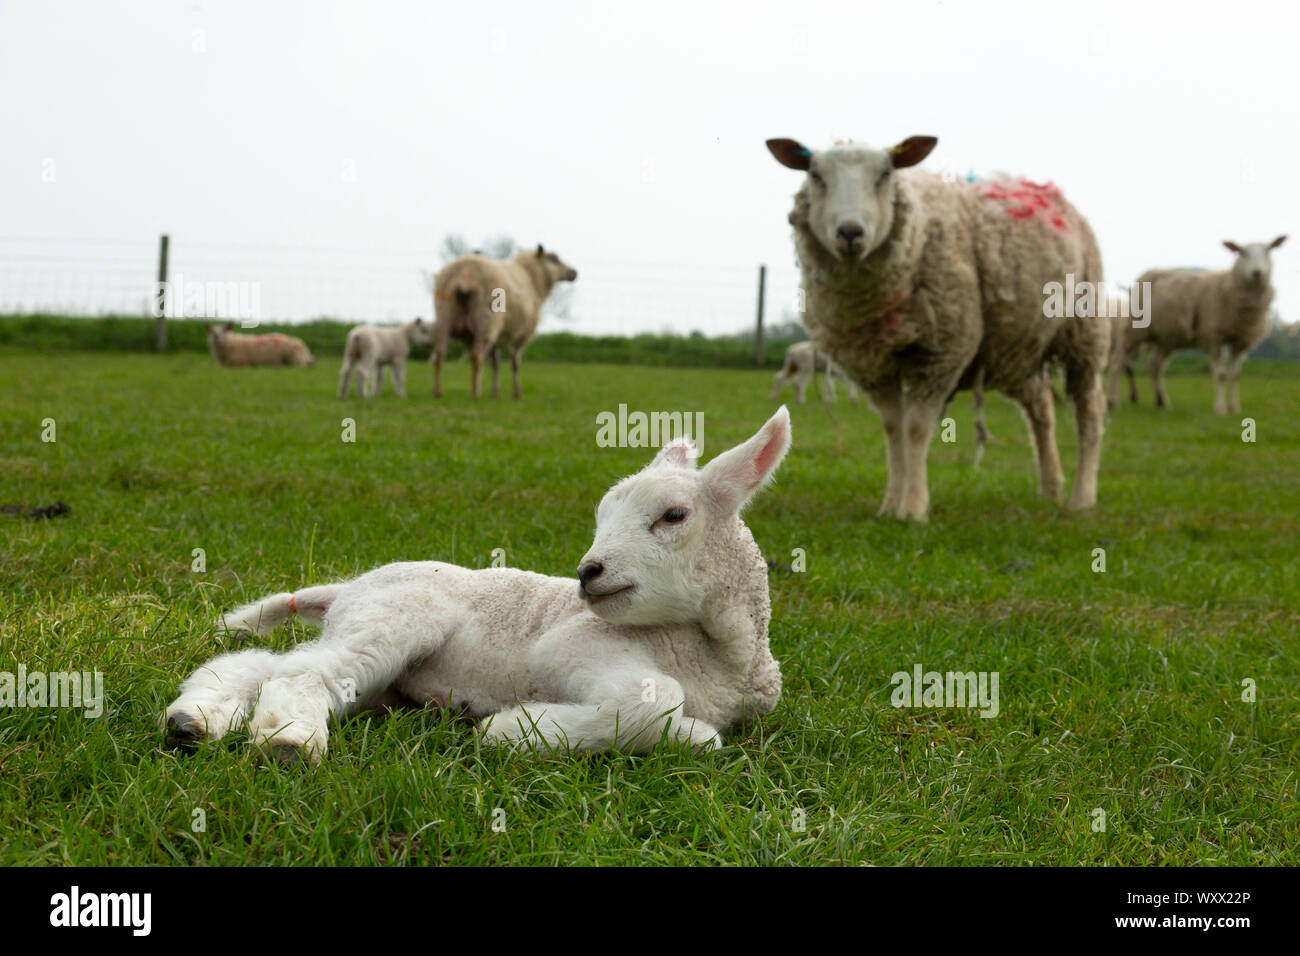 Sheep (Ovis aries) lamb laying in the grass, England Stock Photo